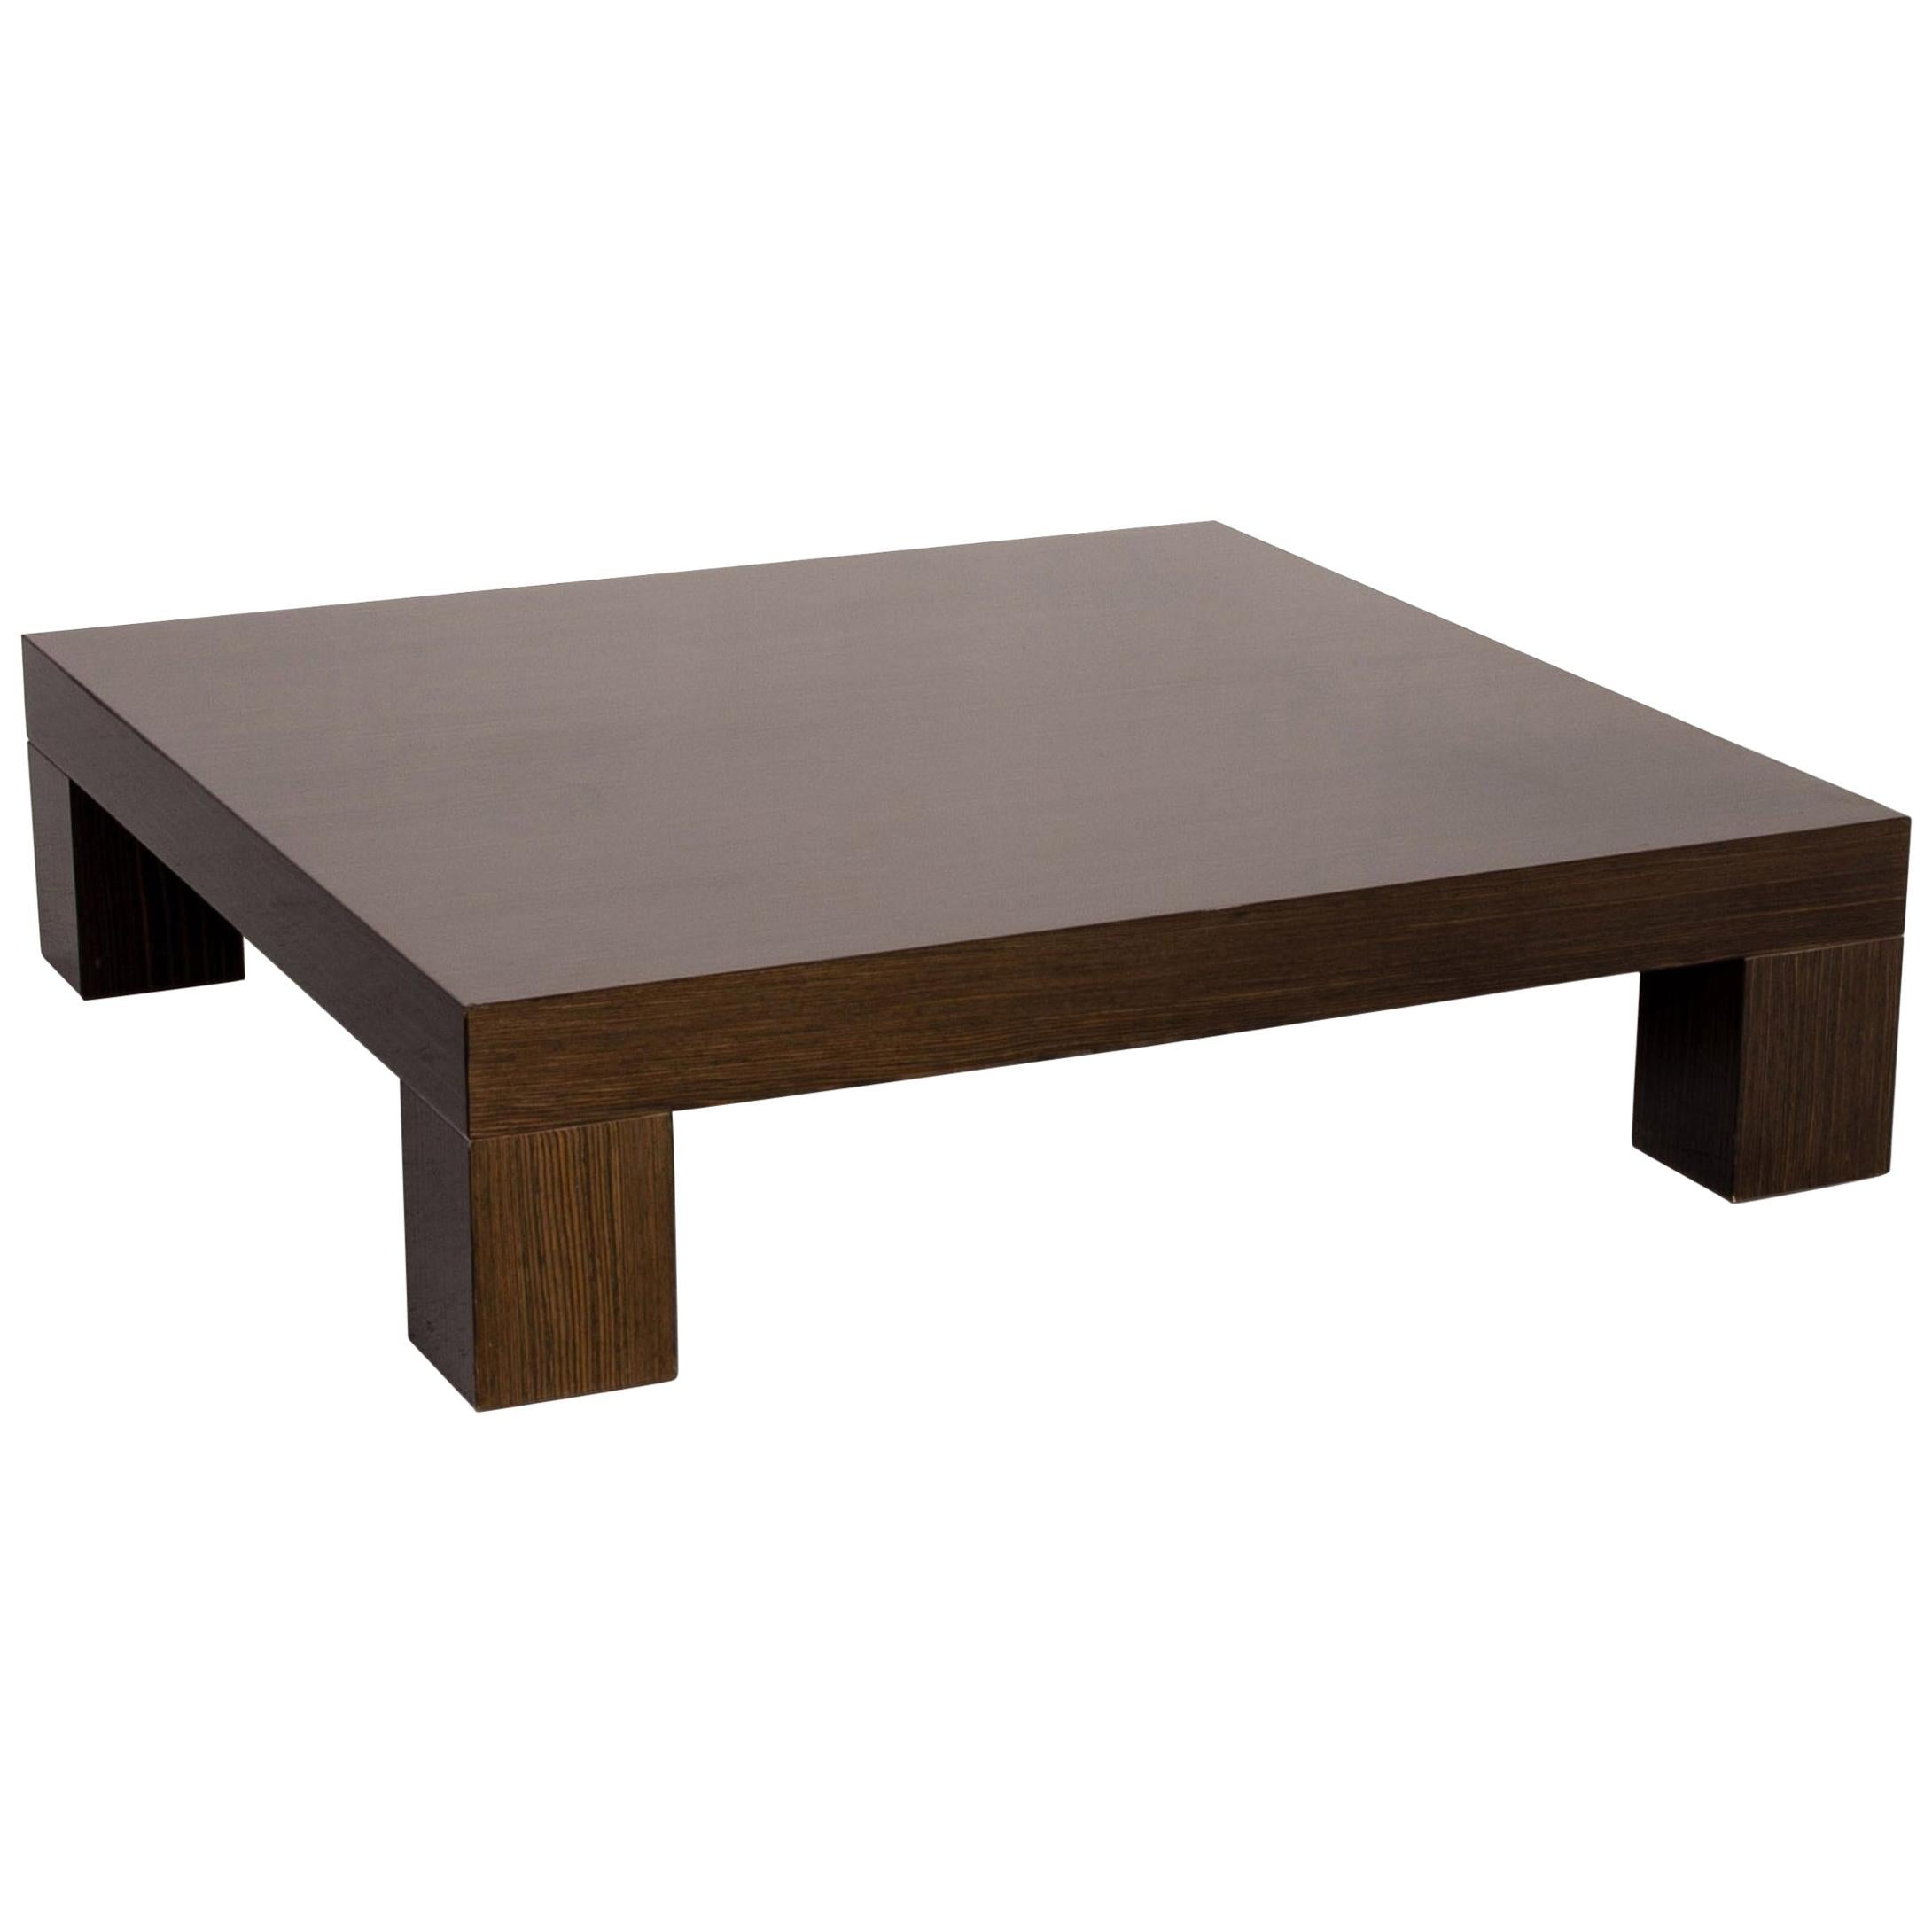 Minotti Wooden Coffee Table Brown High Gloss Table For Sale